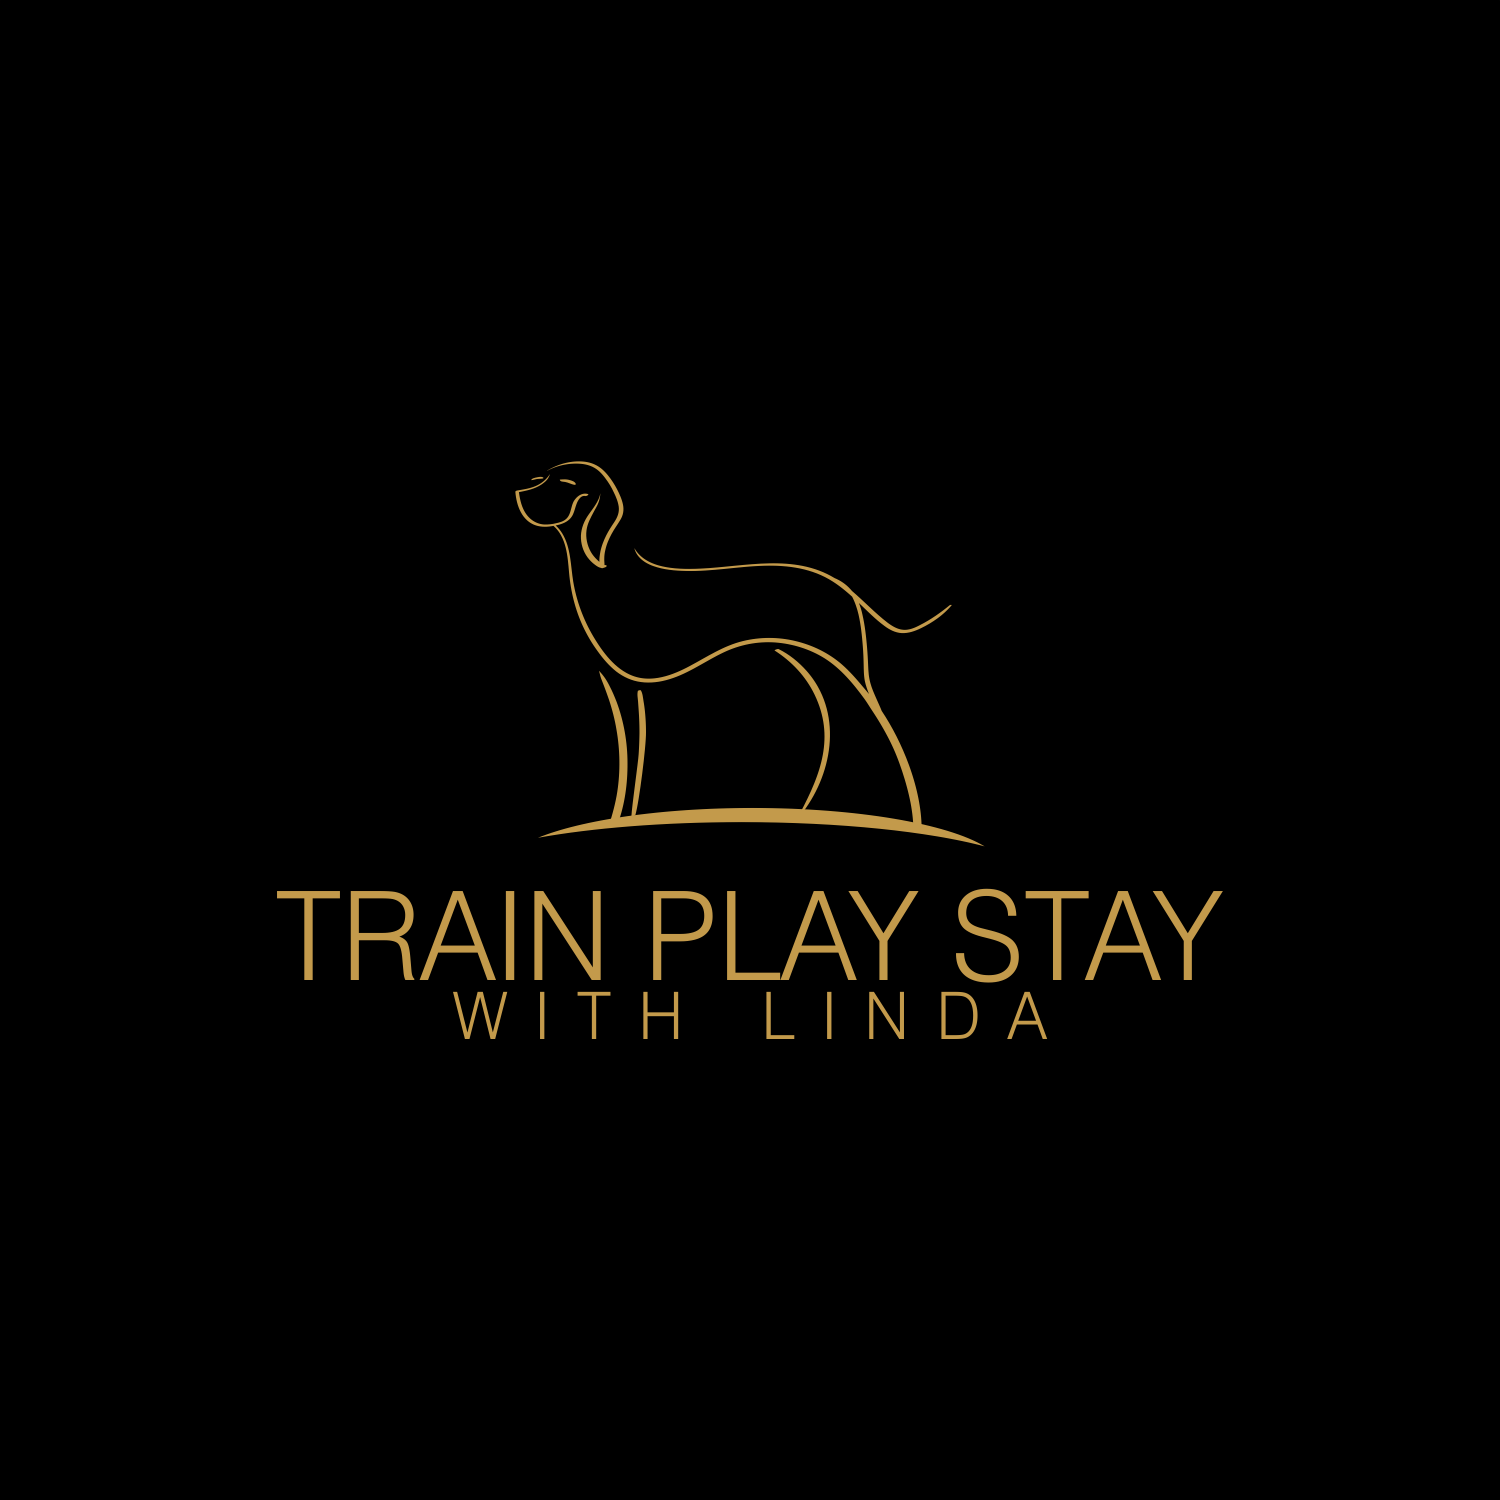 Colorful Dog Logo - Playful, Colorful, Dog Training Logo Design for Train Play Stay OR ...